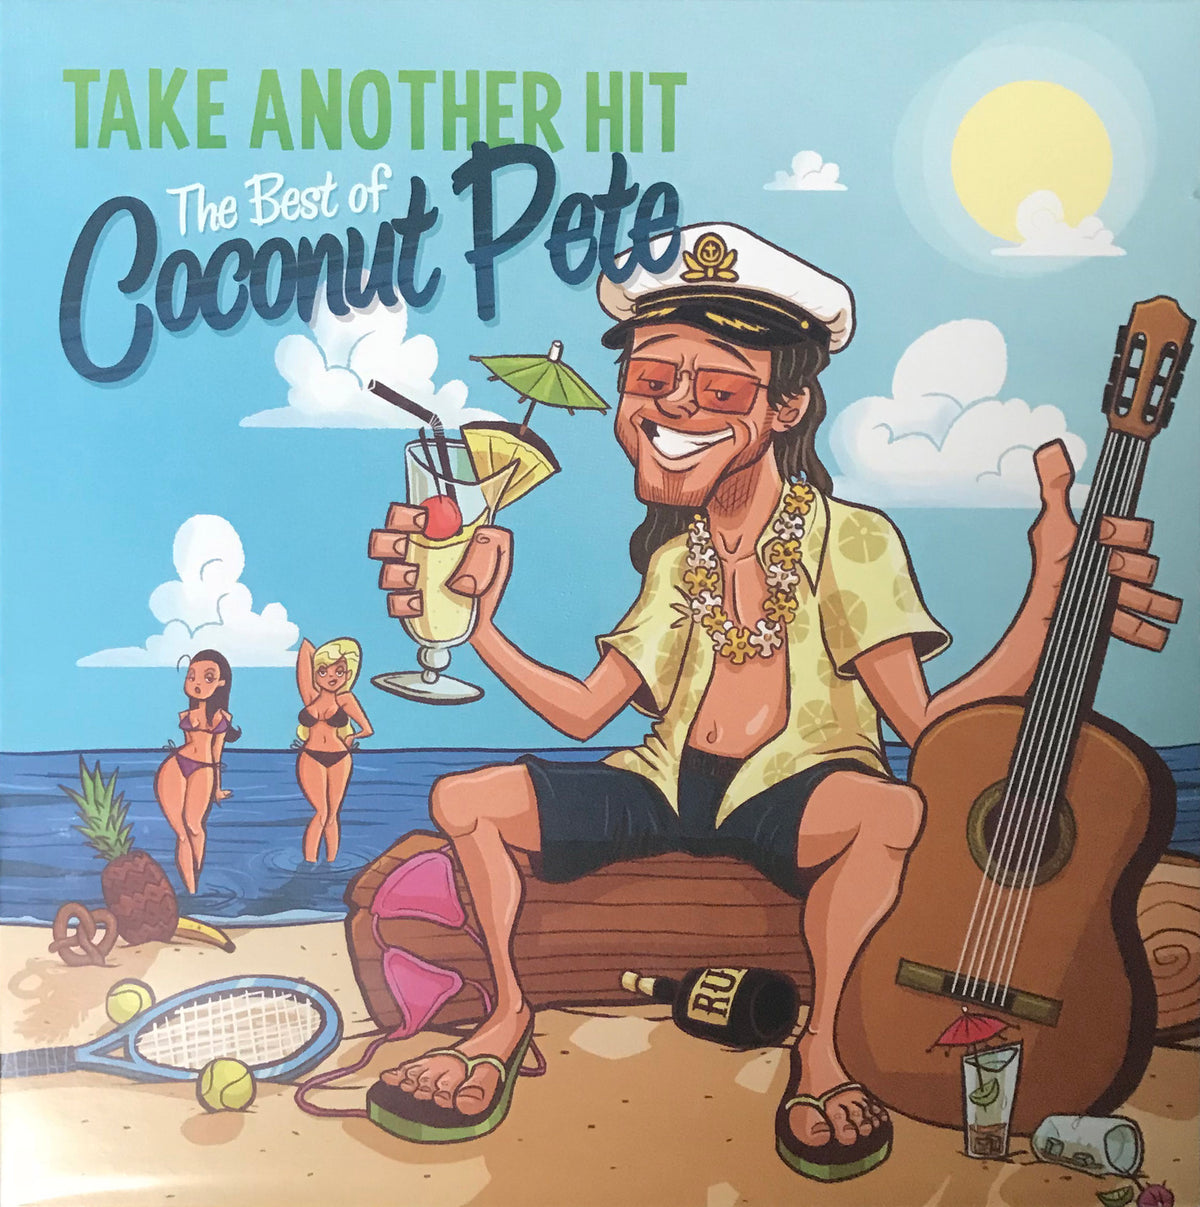 The Best of Coconut Pete: Take Another Hit 7" (ETR065)